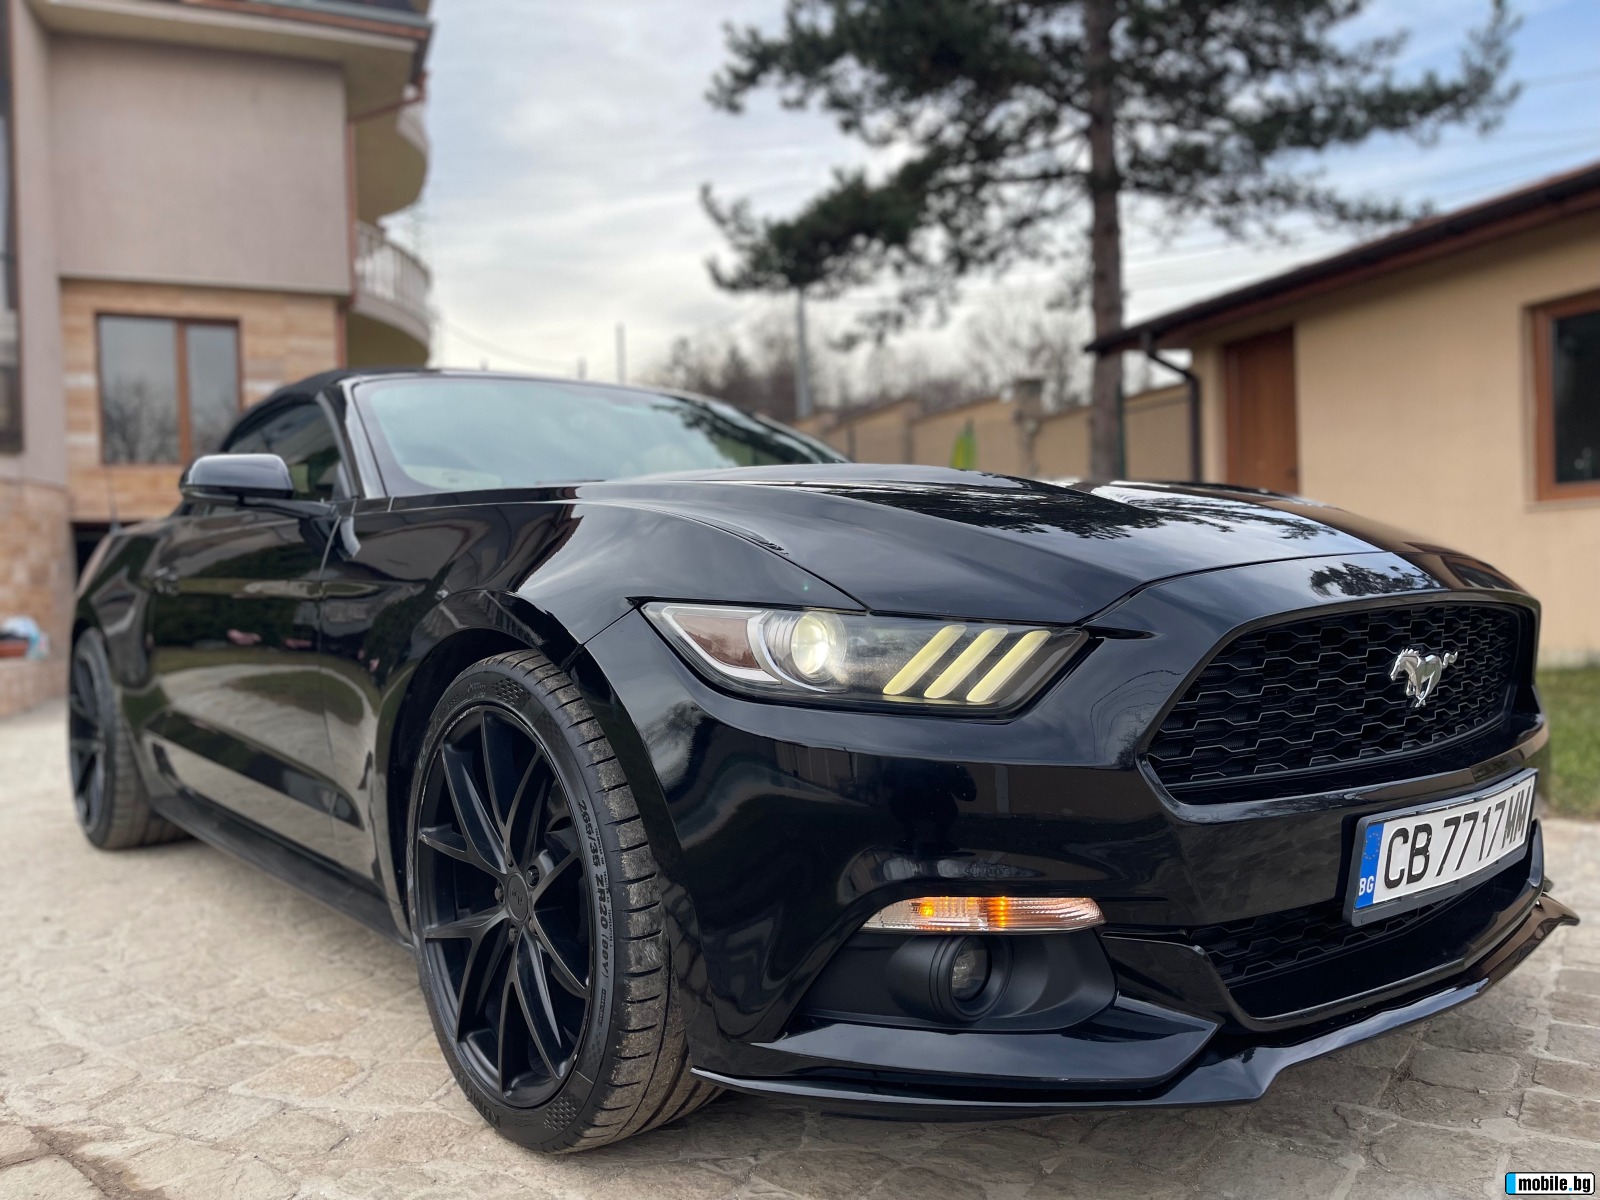 Ford Mustang CABRIO | Mobile.bg   16